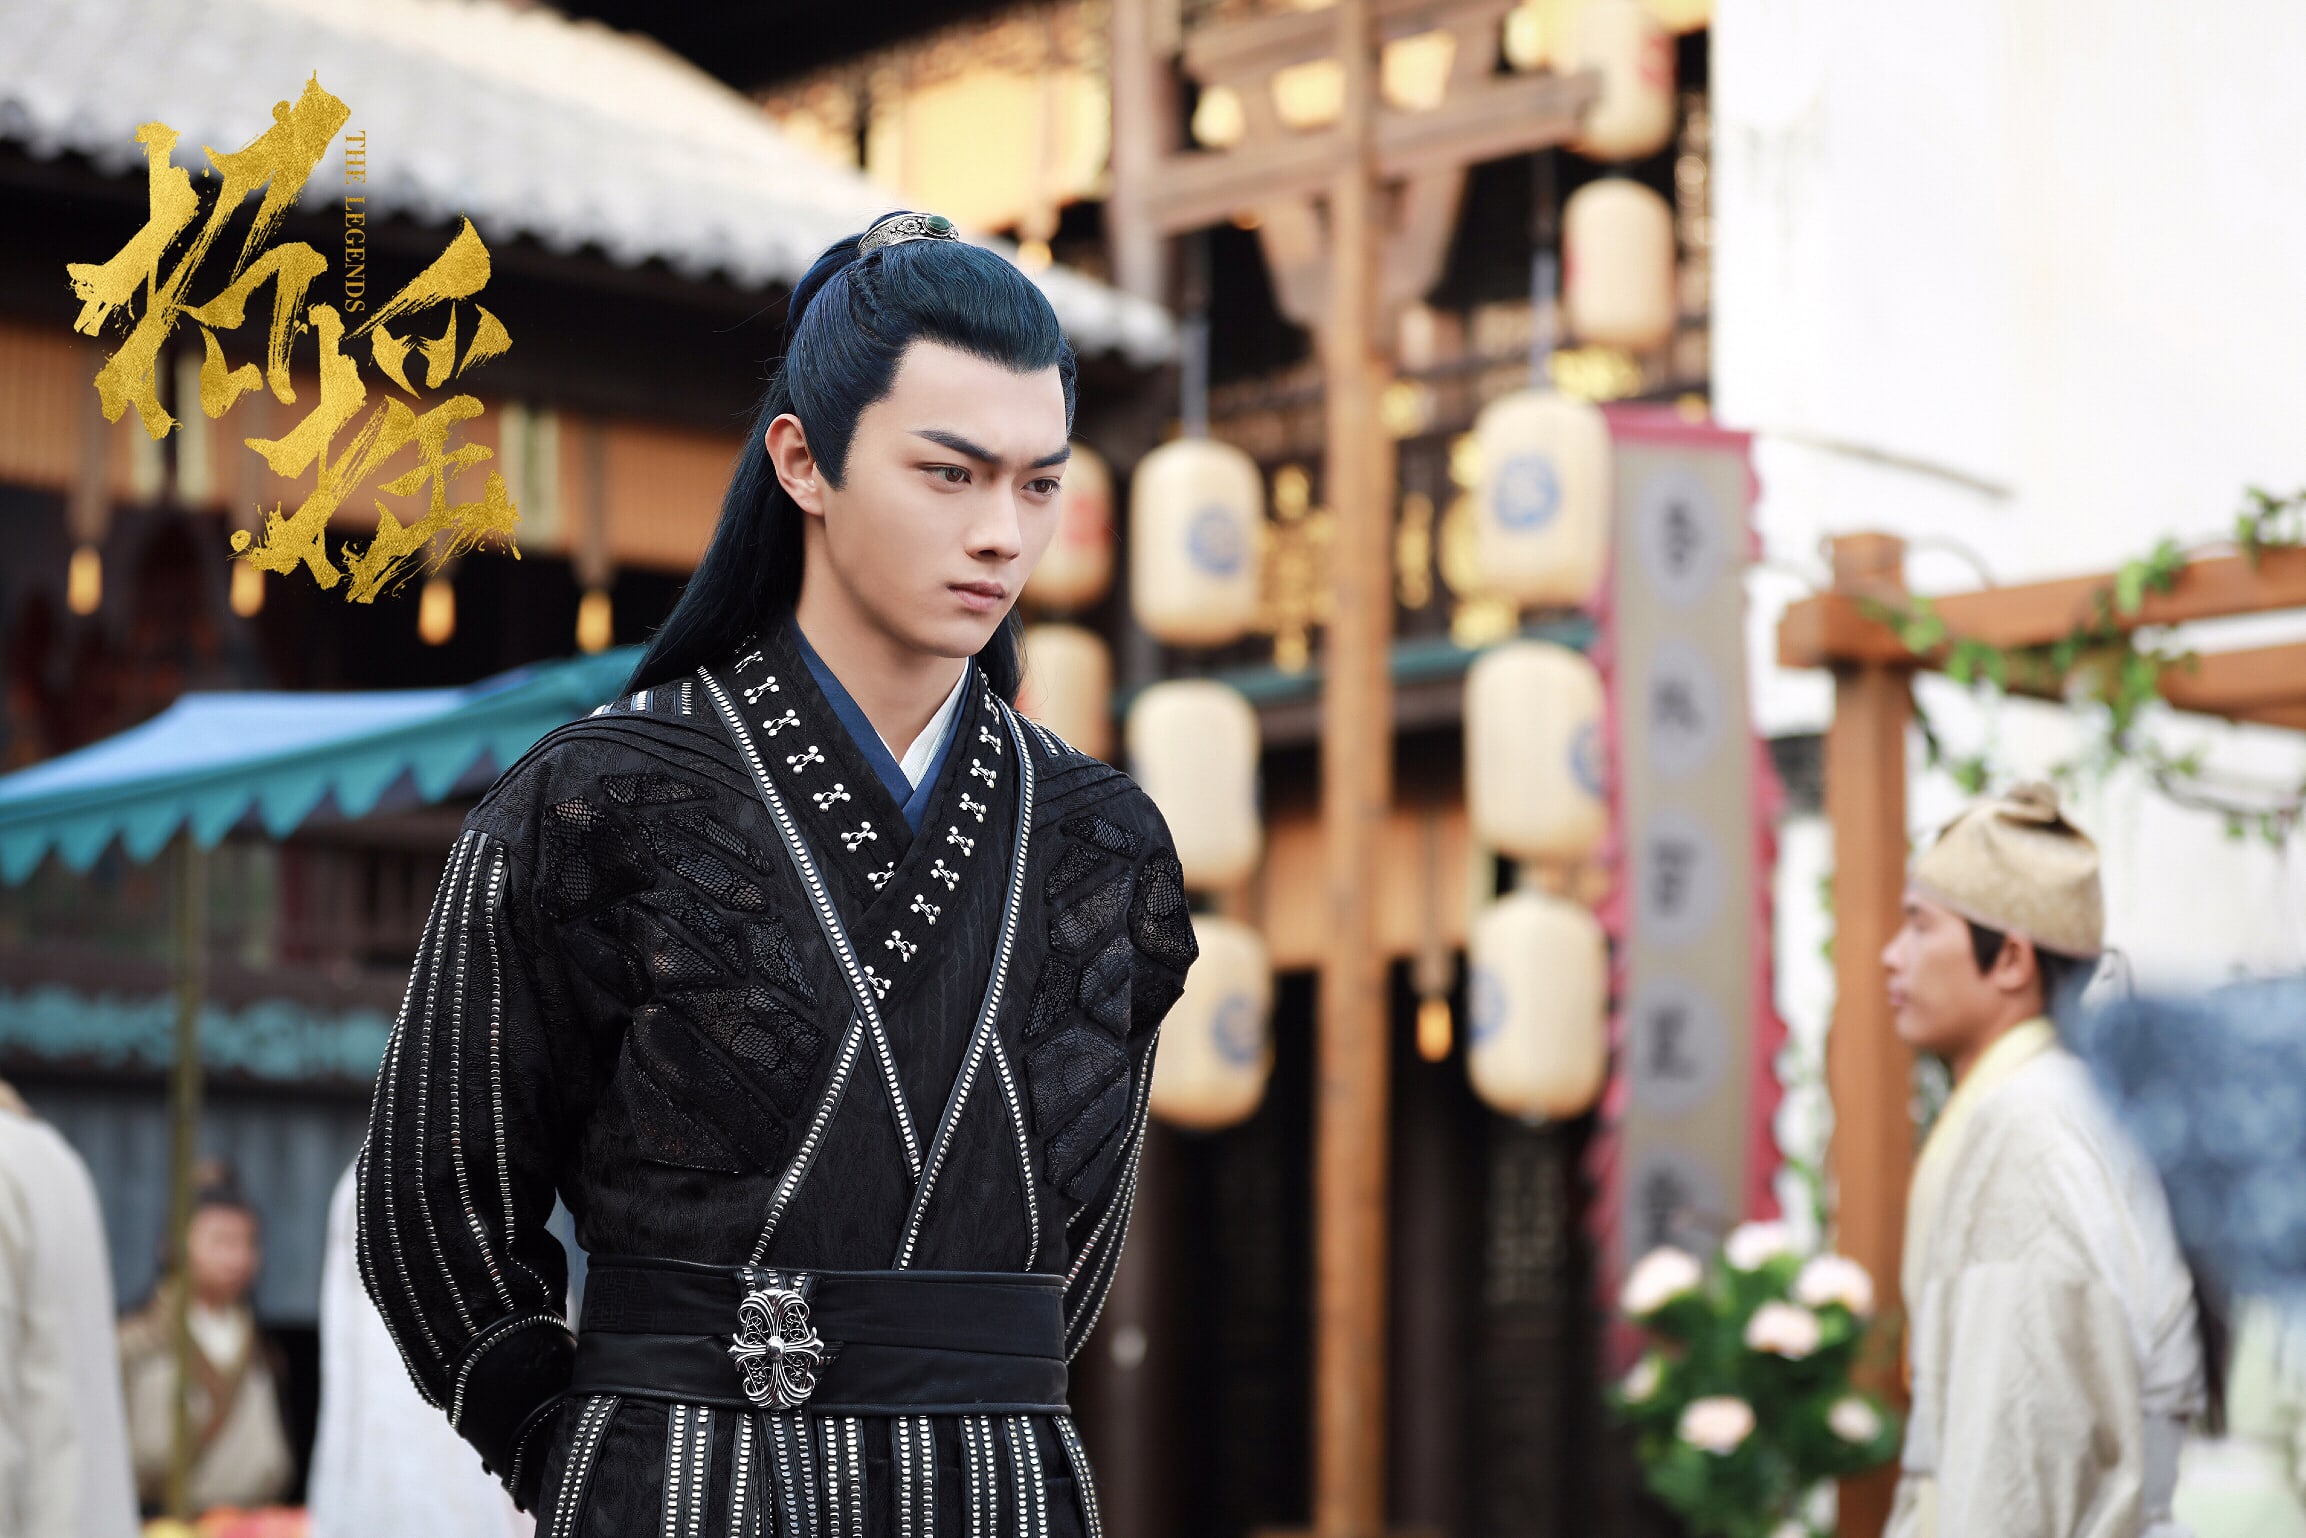 A Heroine's Vow Of Revenge: 4 Reasons To Watch C Drama “The Legends”